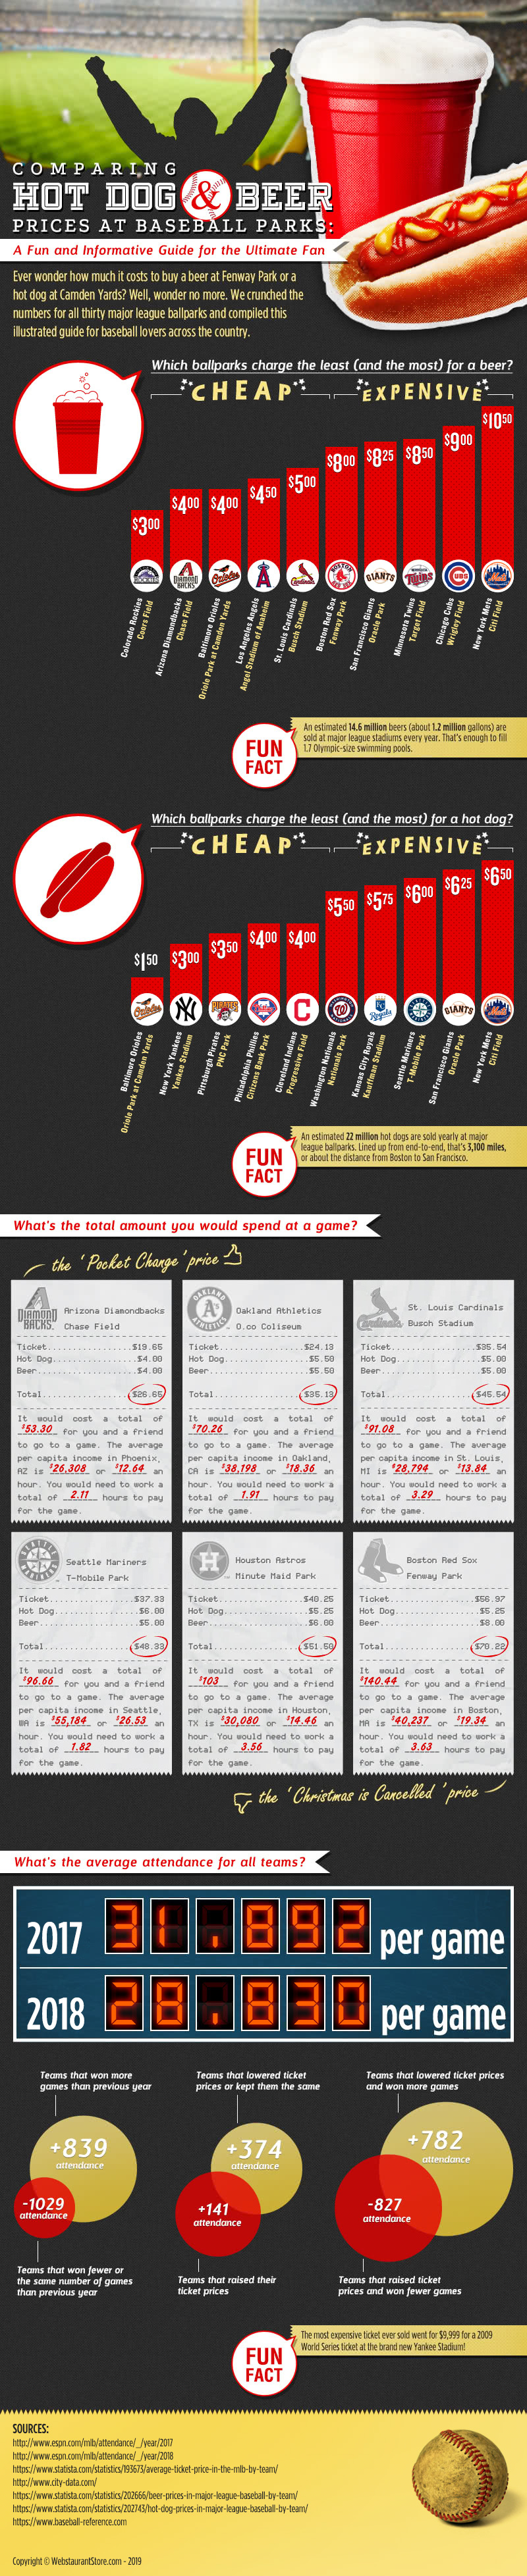 Hot Dog and Beer Prices at Baseball Parks infographic